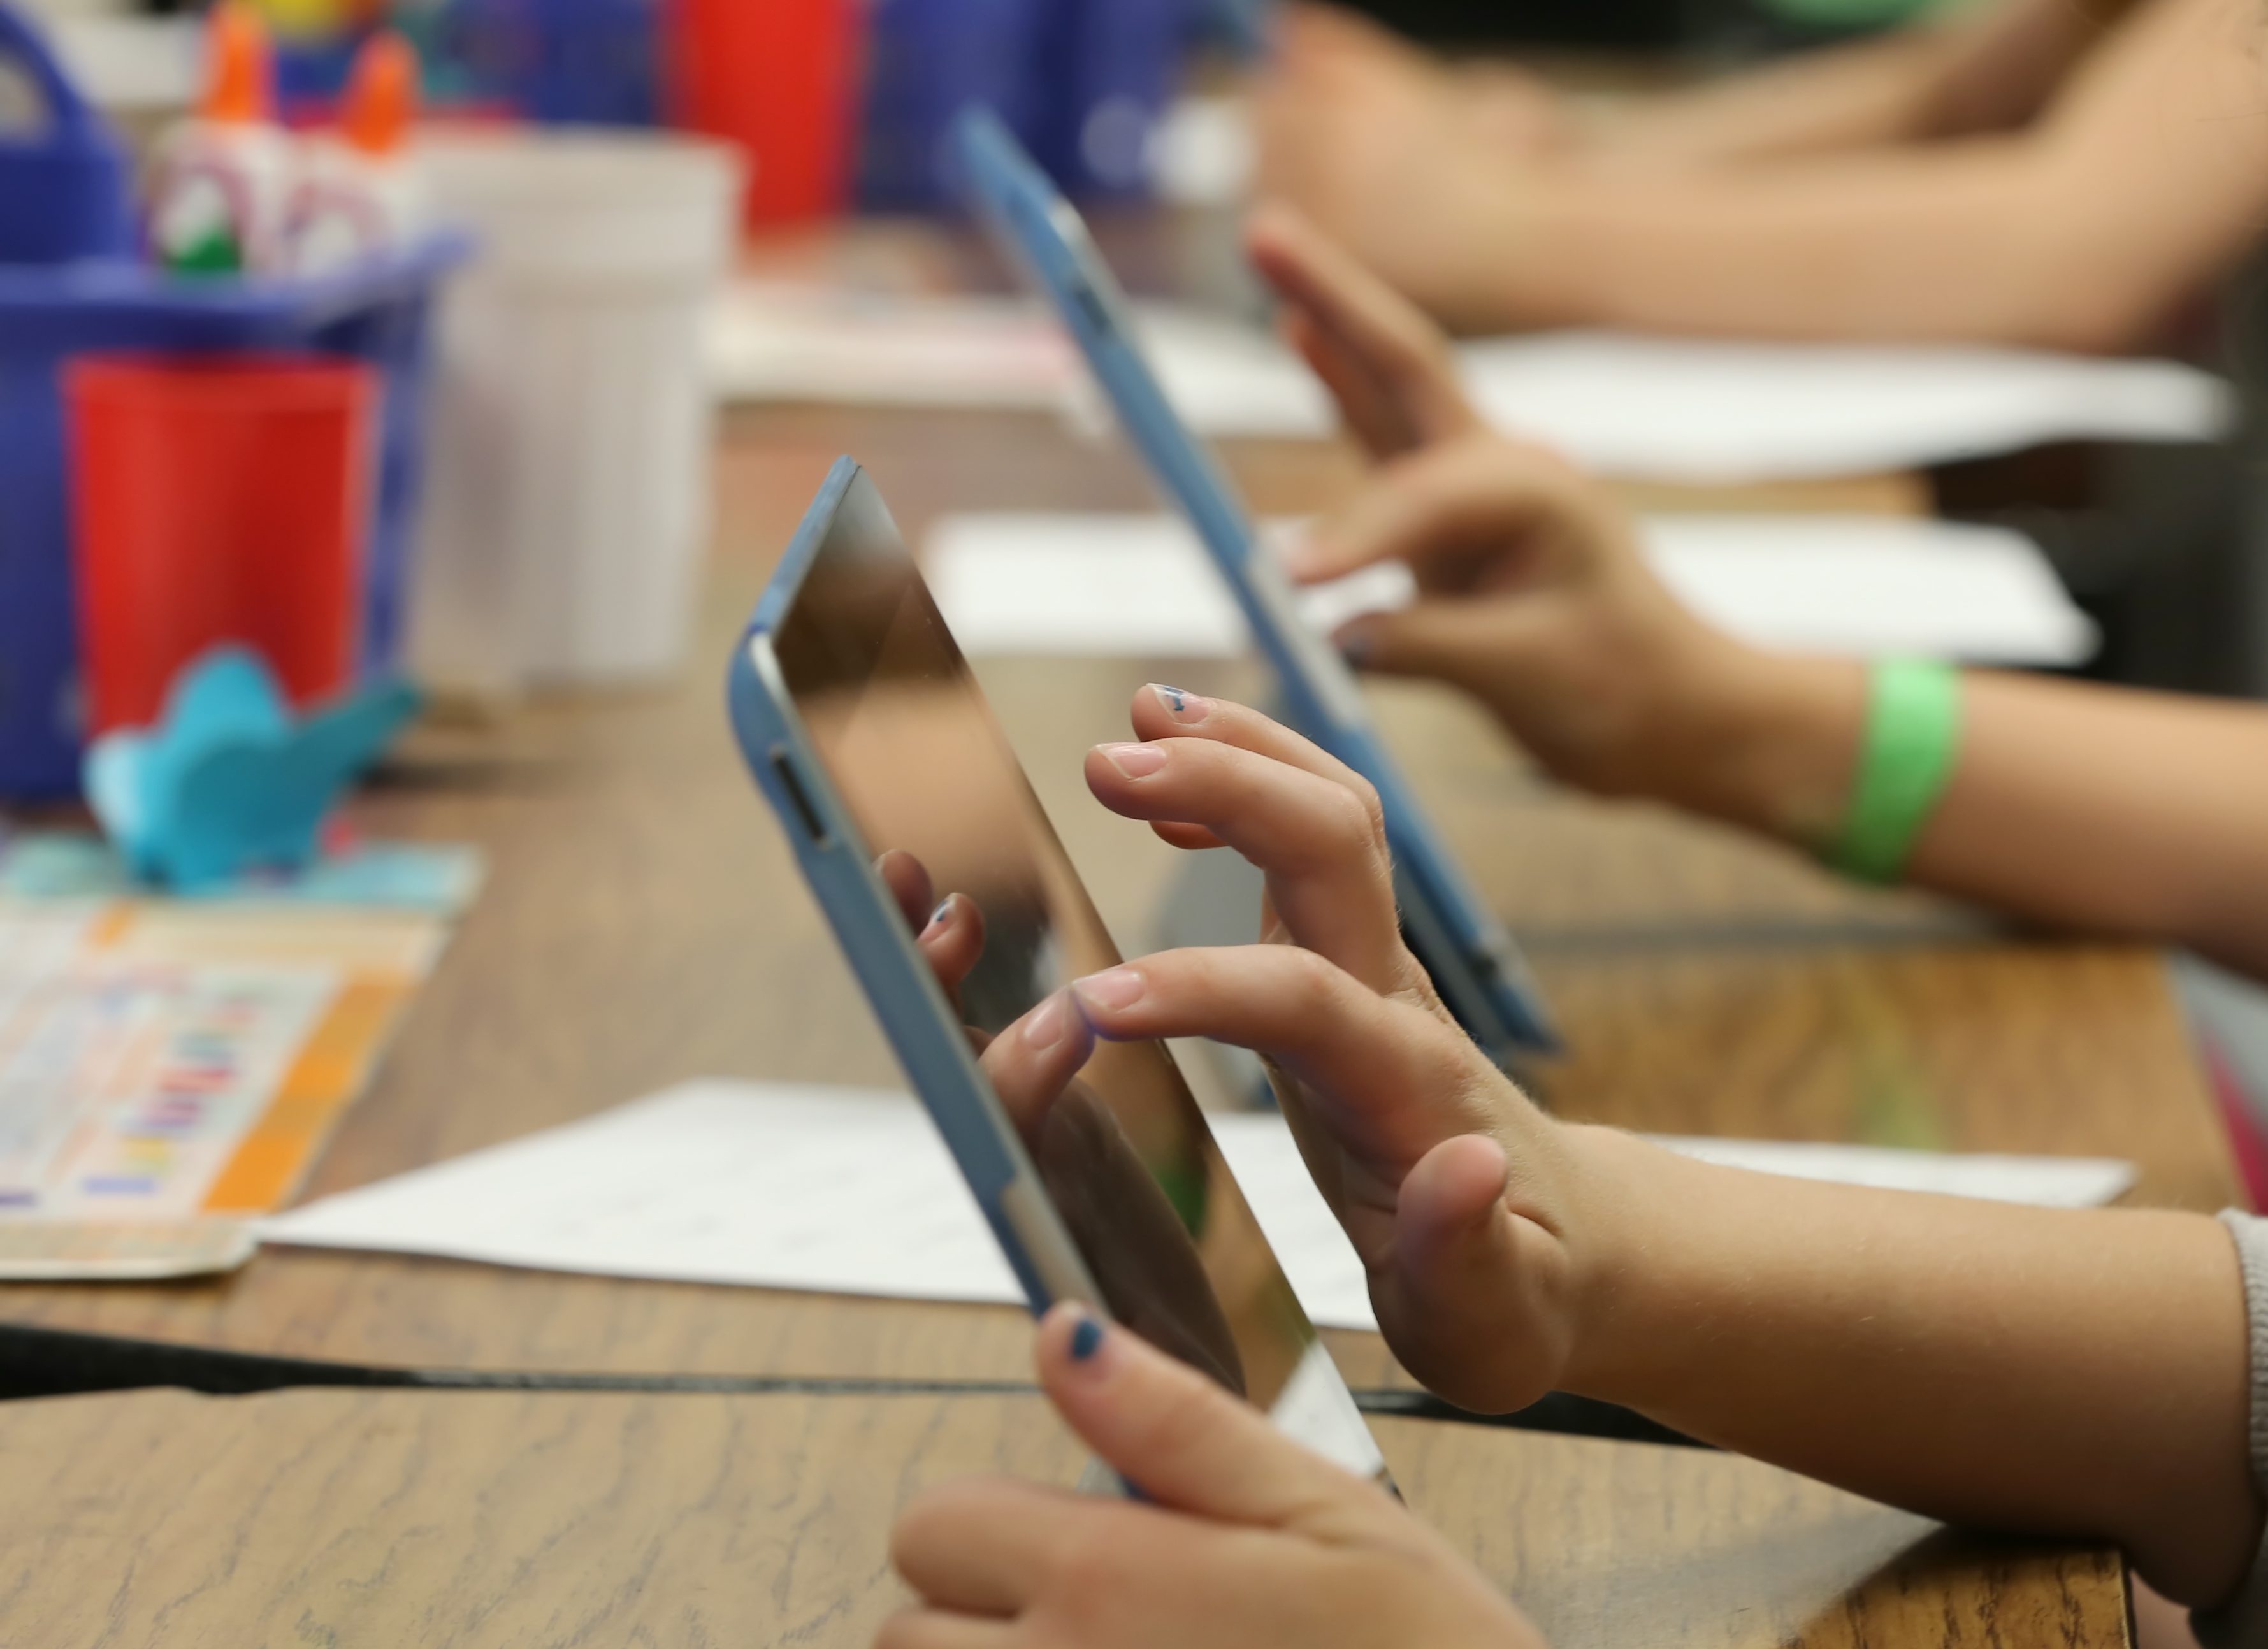 Second-Graders Use Apple Inc. iPads In The Classroom